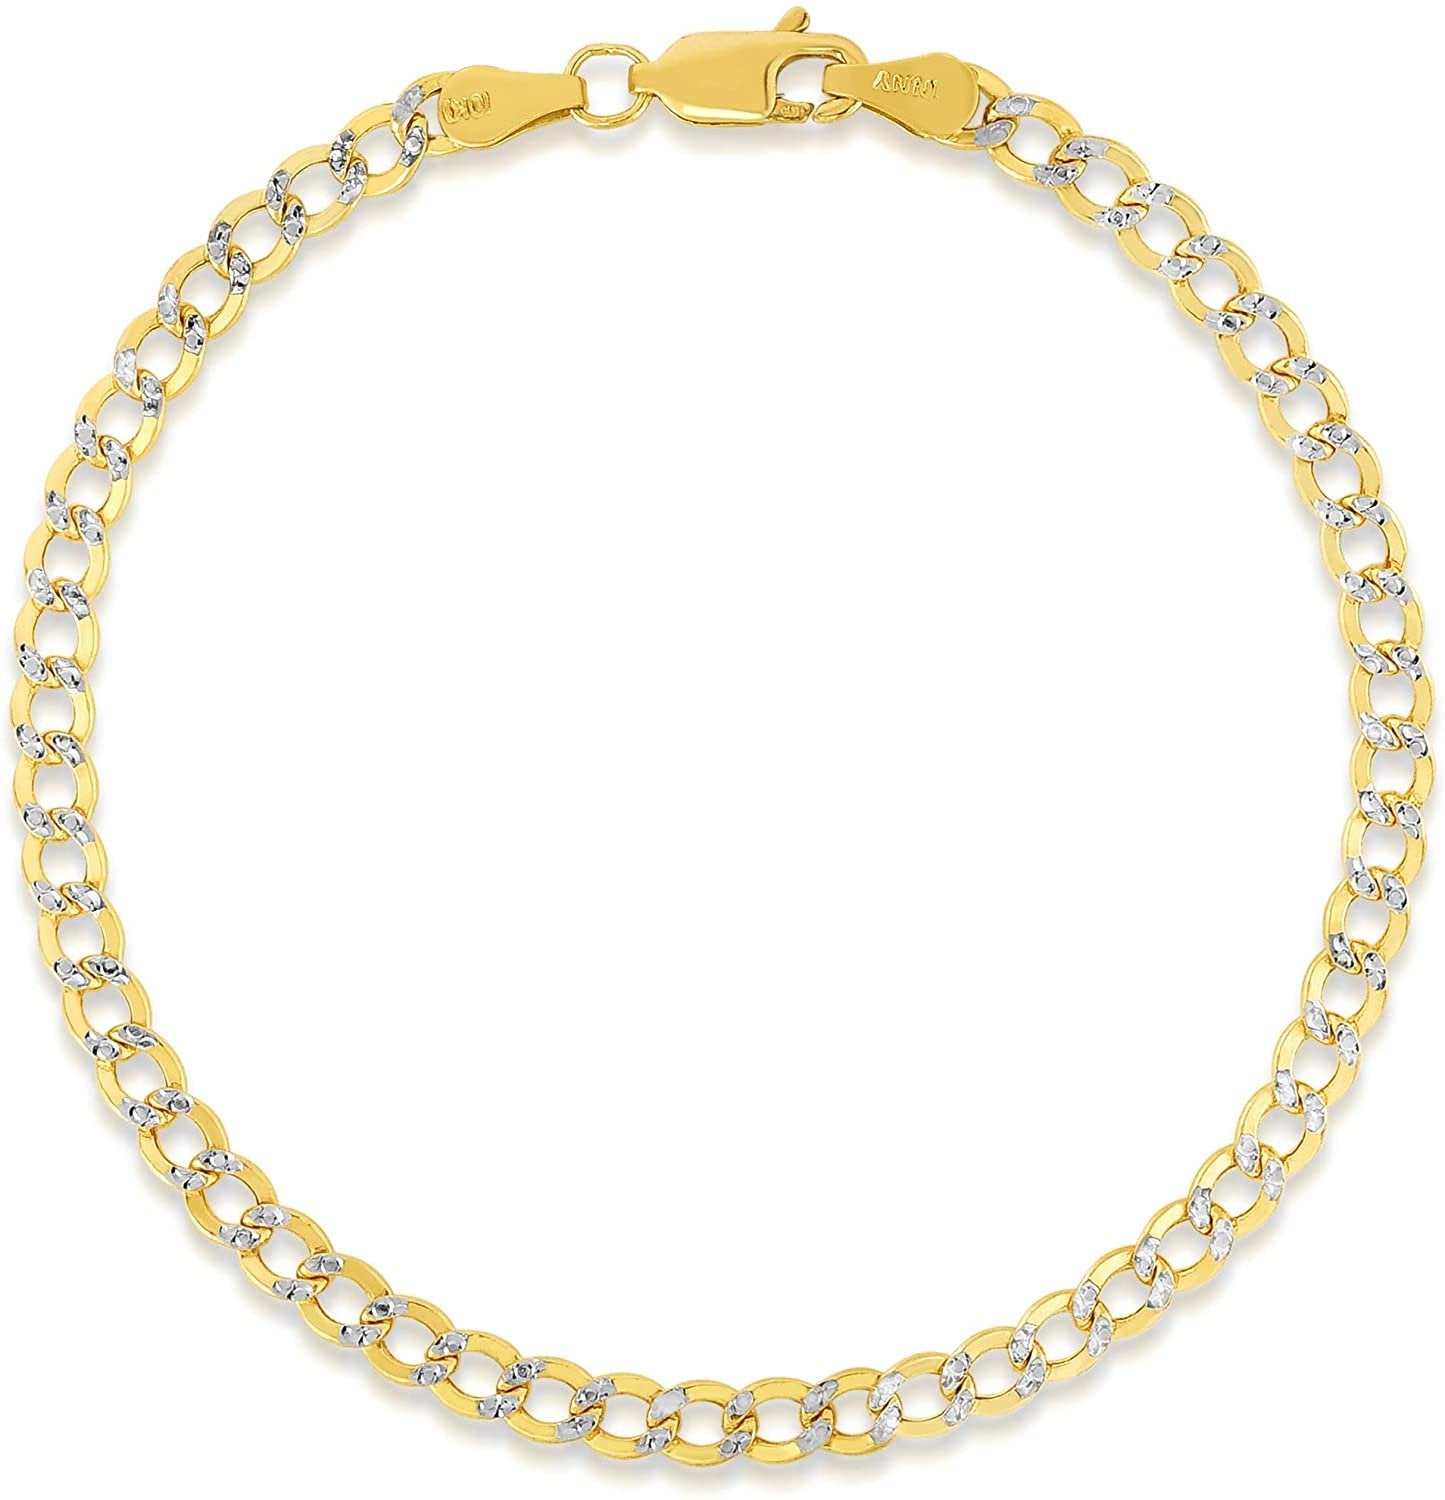 10k Yellow Gold 3.5mm Two Tone Lightweight White Pave Curb Bracelet and Anklet